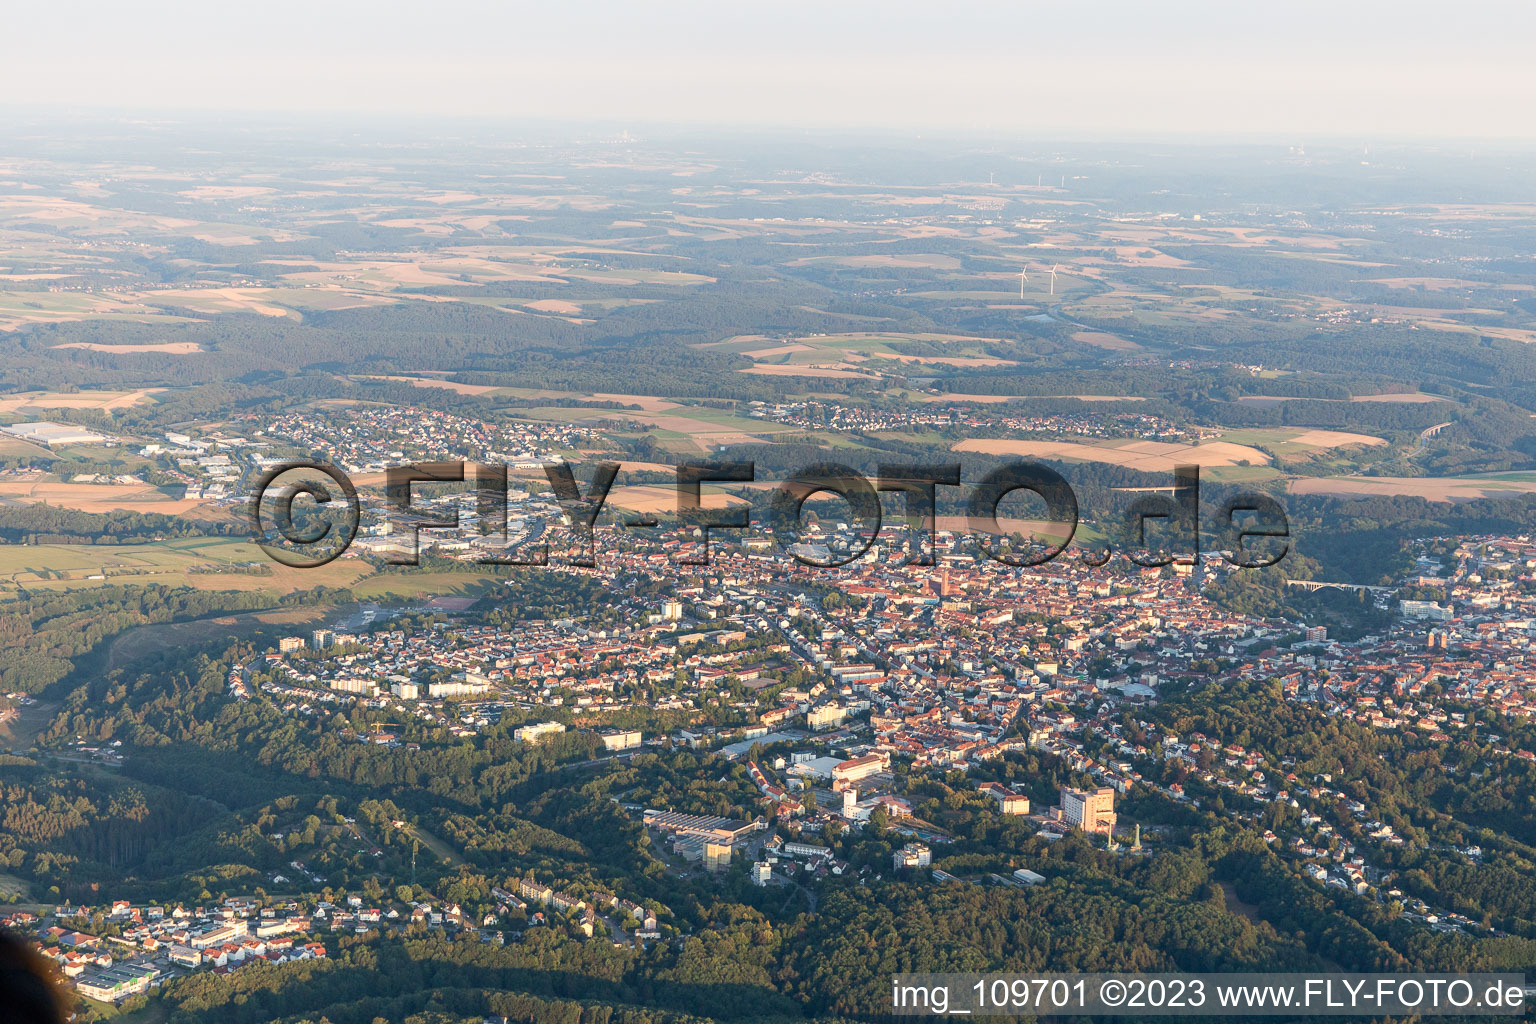 Pirmasens in the state Rhineland-Palatinate, Germany from the drone perspective